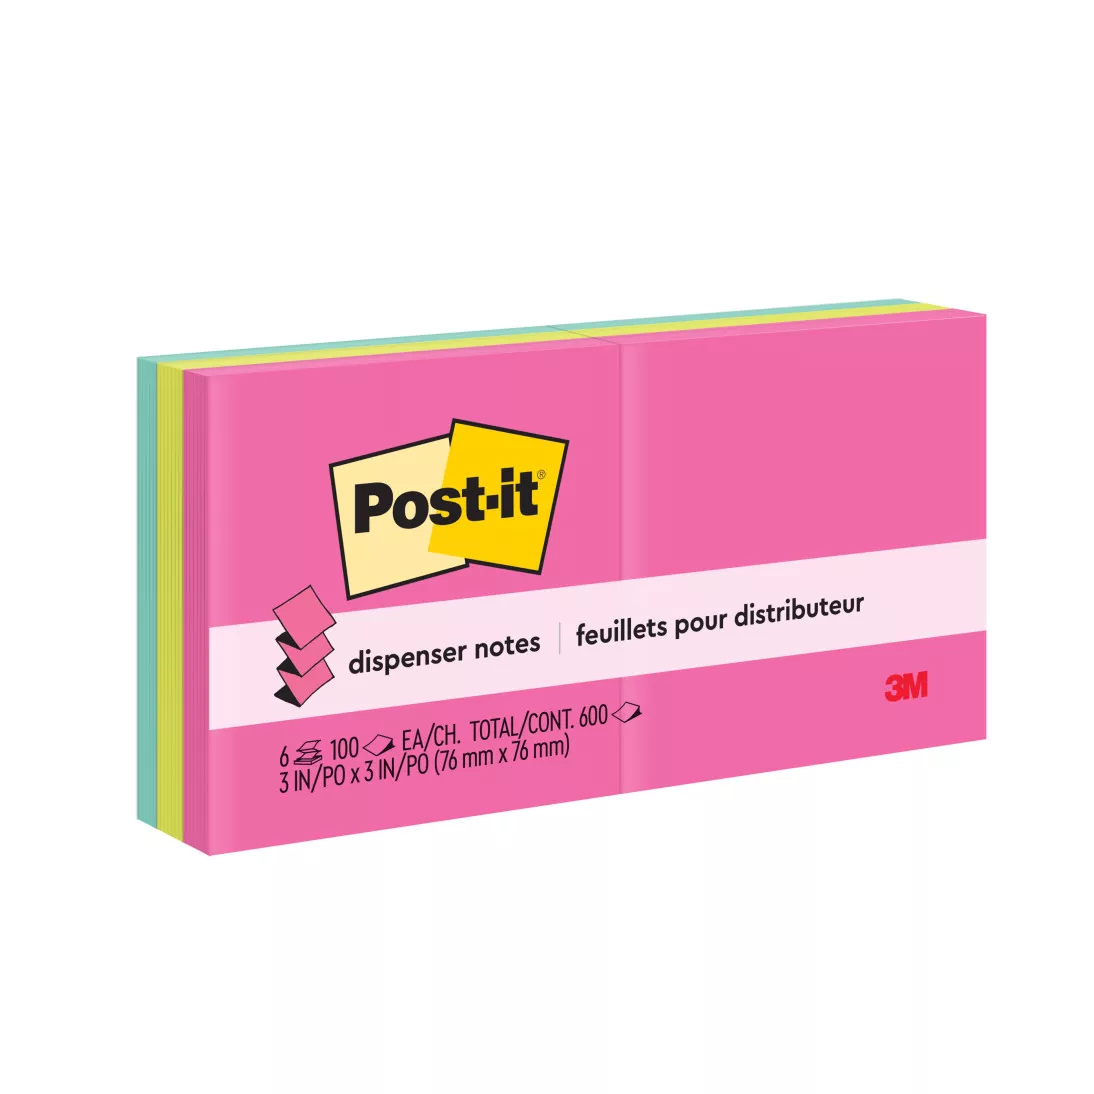 Post-it® Pop-up Notes R330-AN, 3 in x 3 in (76 mm x 76 mm) Cape Town
Collection